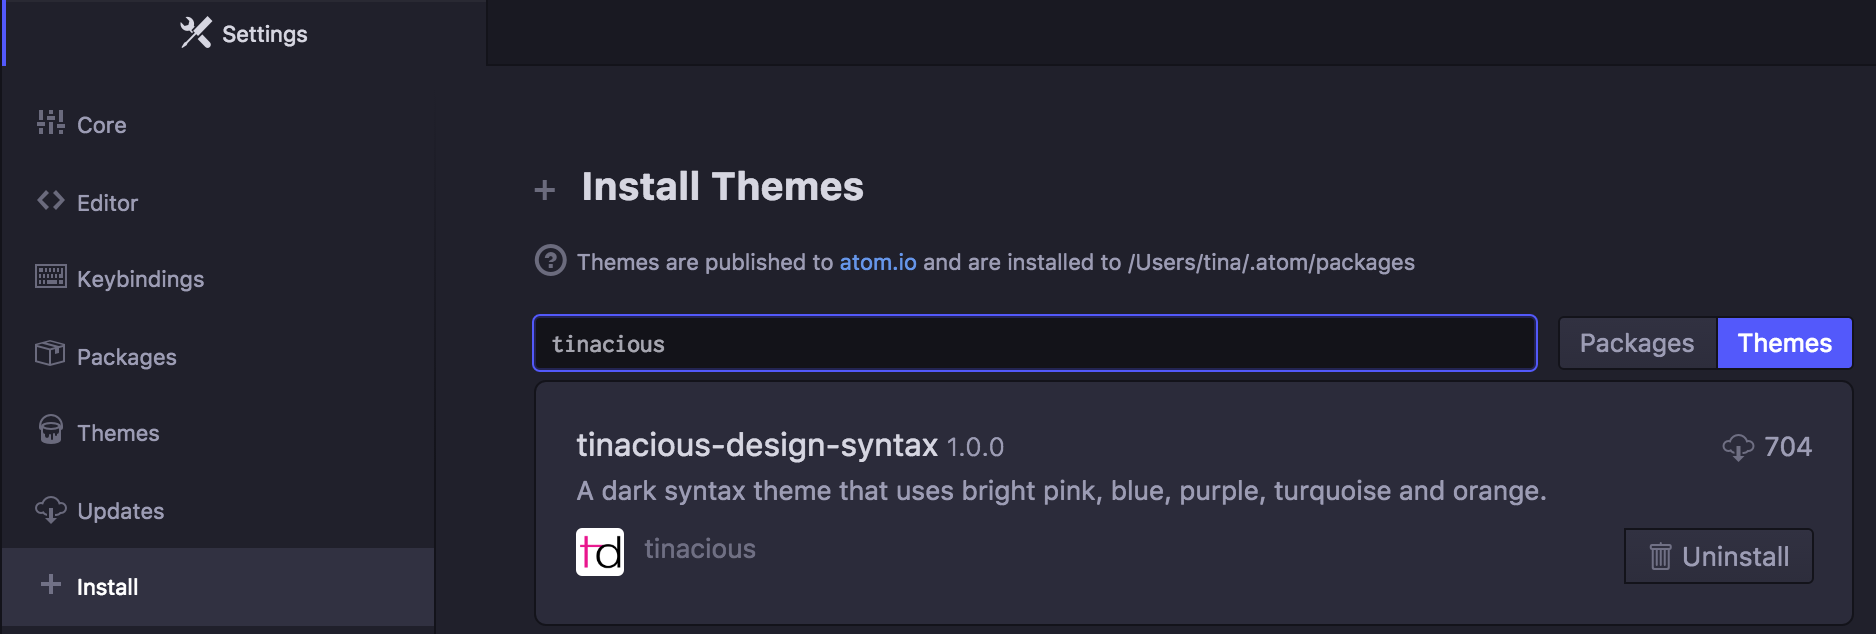 Installing Tinacious Design syntax theme from the Install tab in Atom